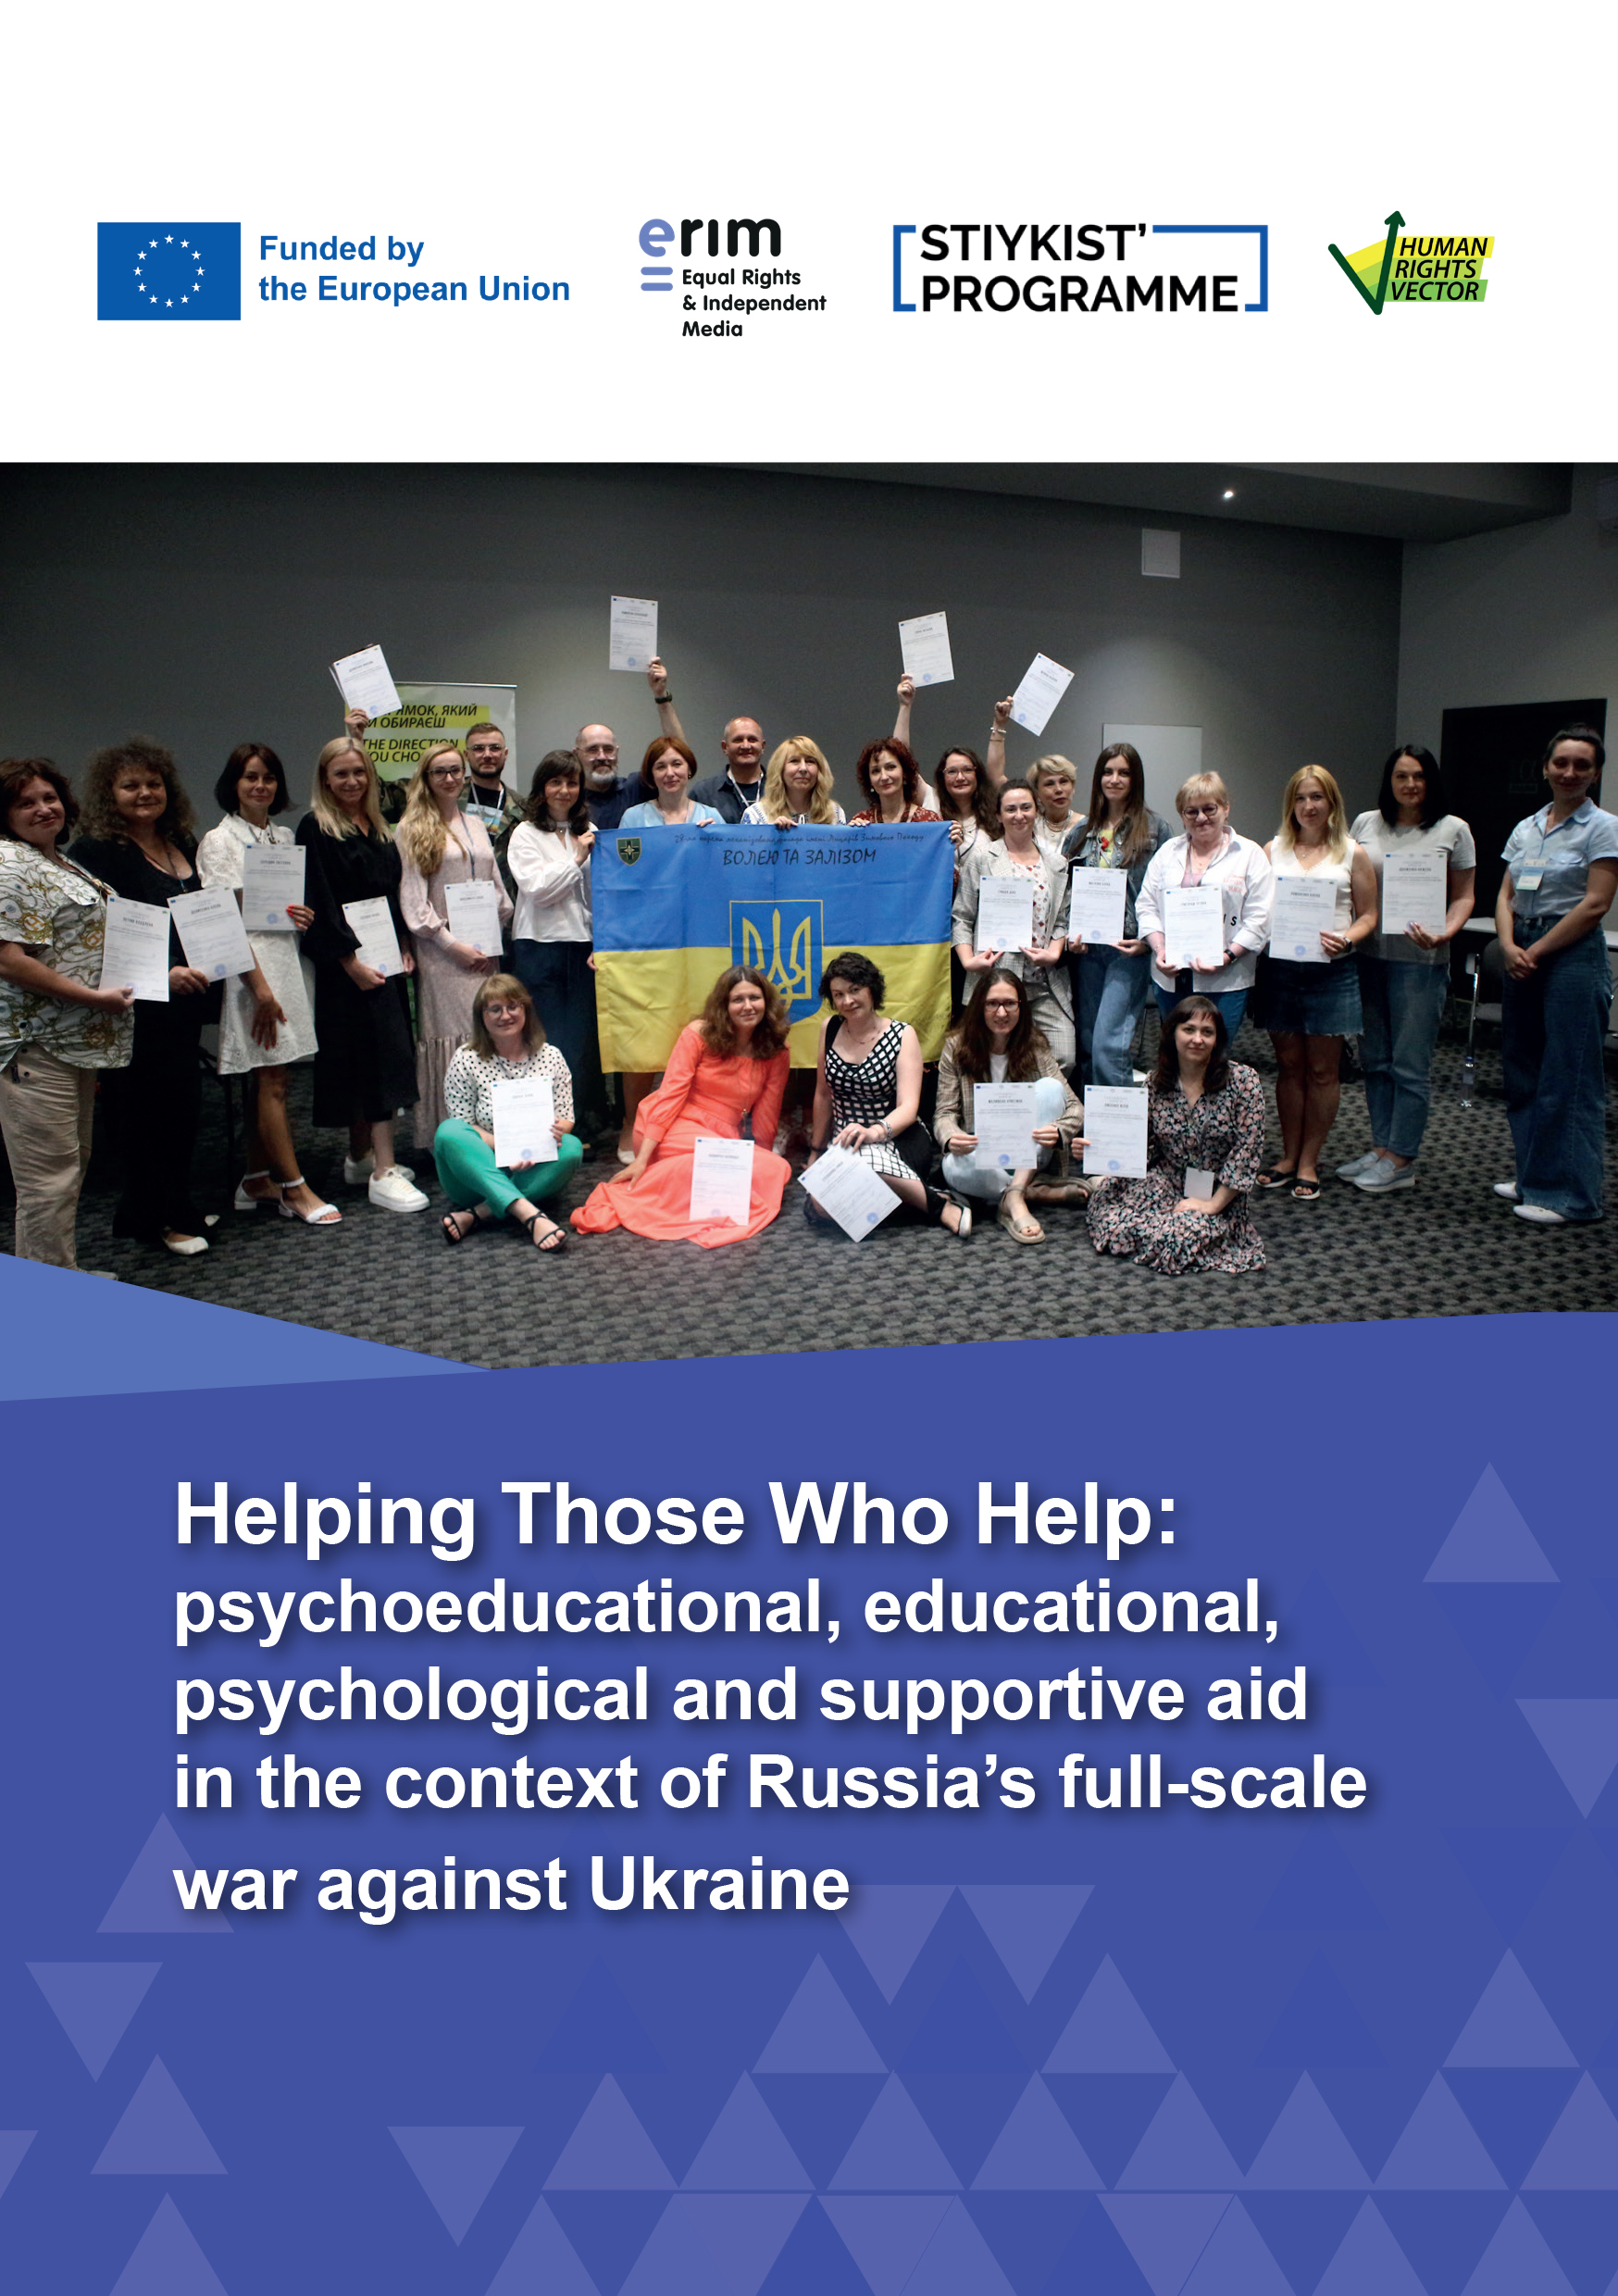 Helping Those Who Help: psychoeducational, educational, psychological and supportive  aid in the context of Russia’s full-scale war against Ukraine